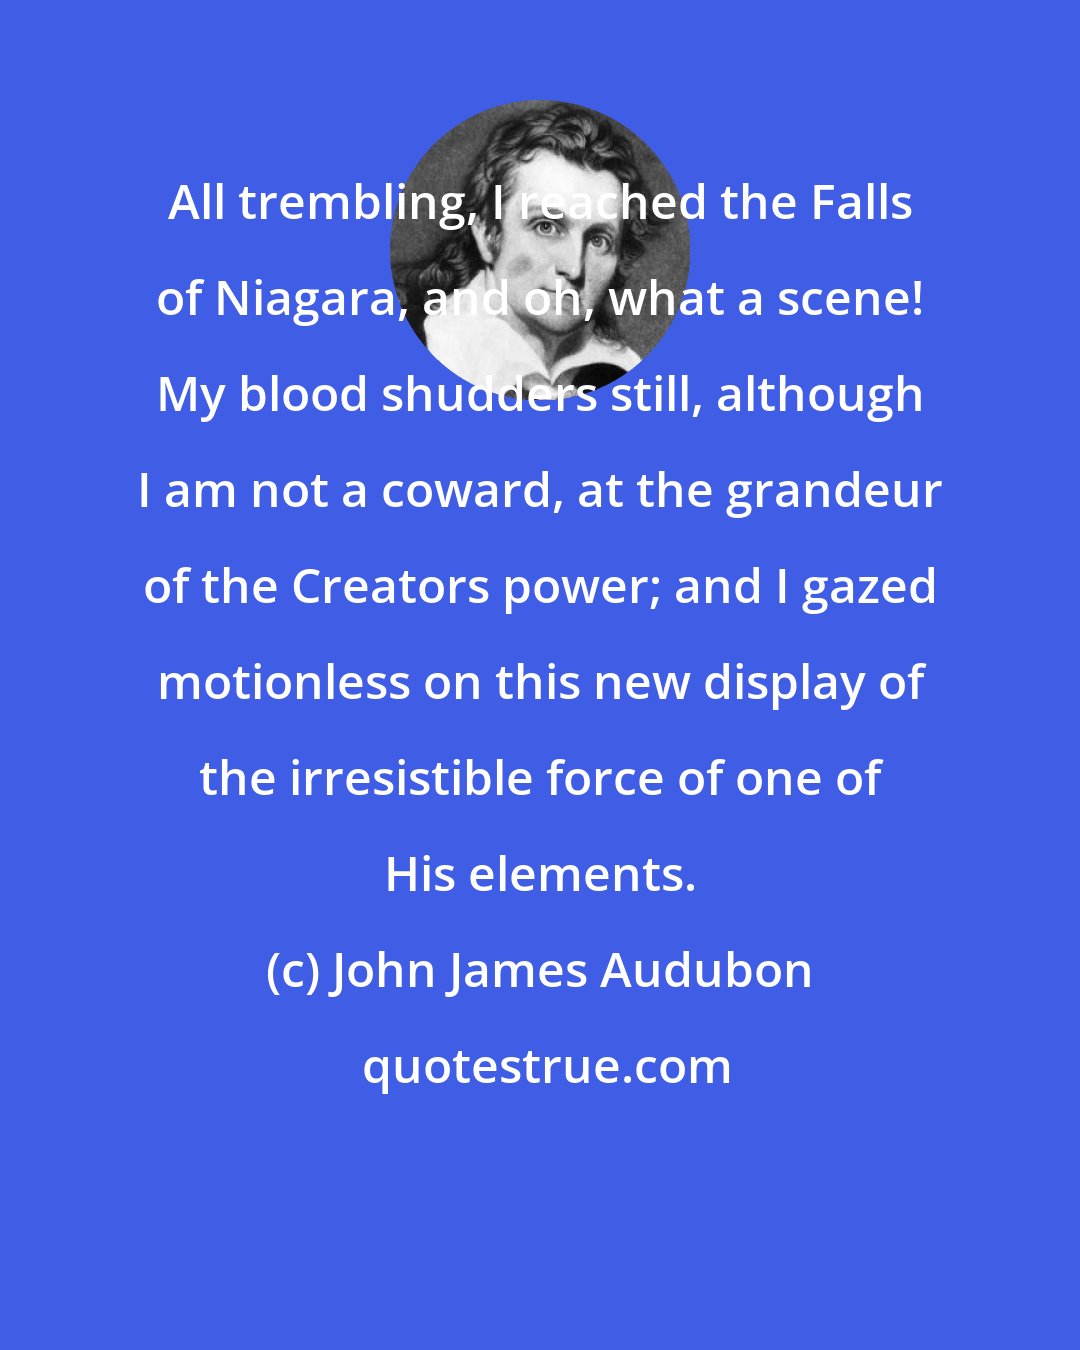 John James Audubon: All trembling, I reached the Falls of Niagara, and oh, what a scene! My blood shudders still, although I am not a coward, at the grandeur of the Creators power; and I gazed motionless on this new display of the irresistible force of one of His elements.